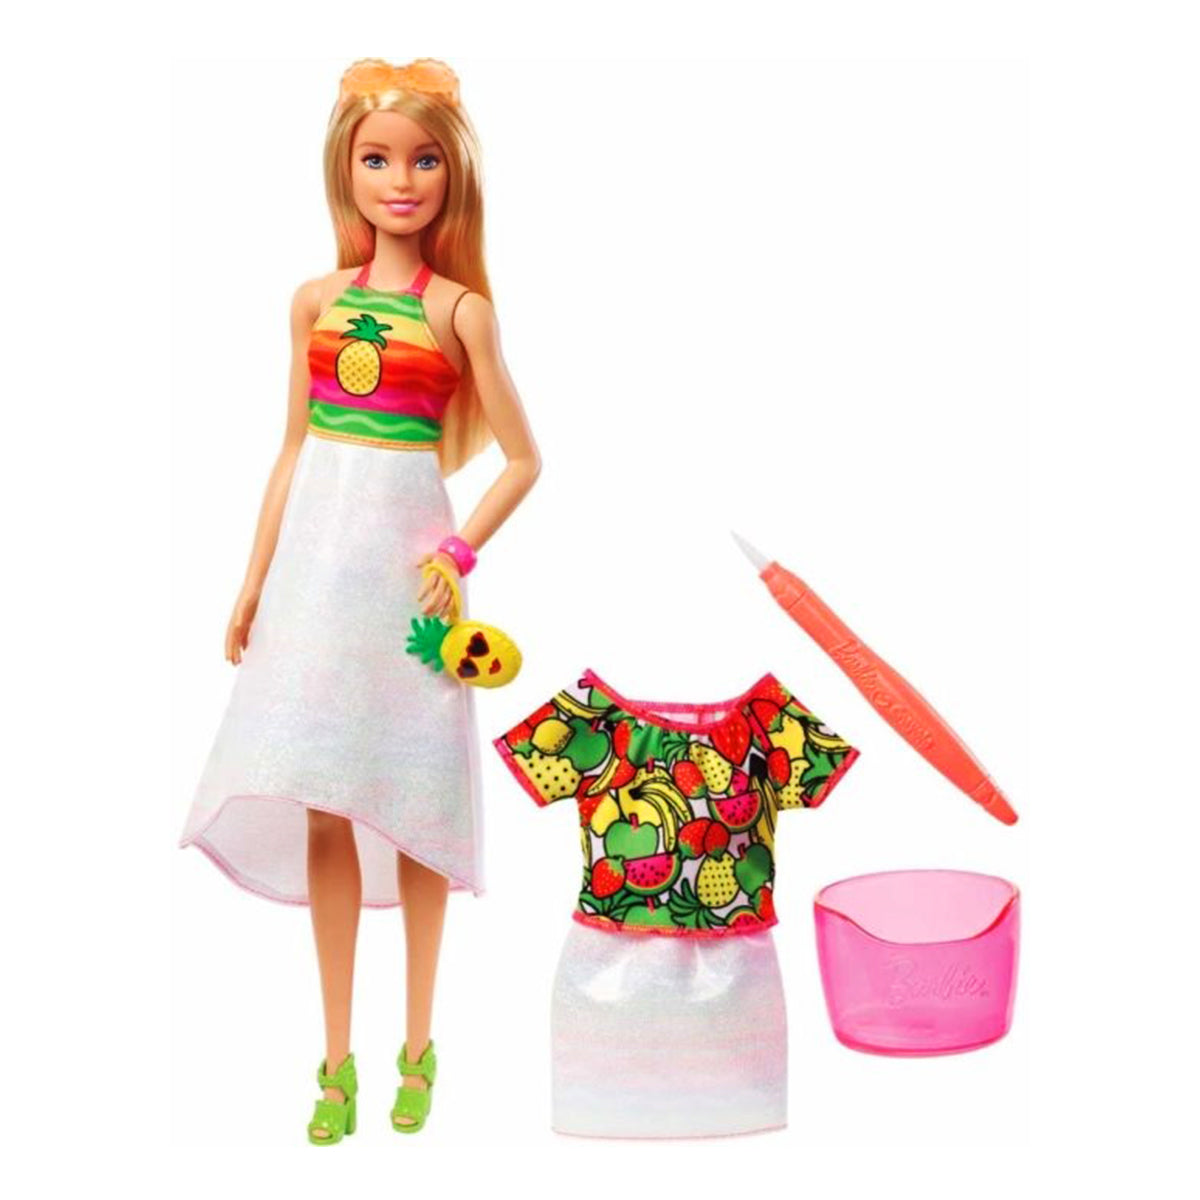 Barbie - Crayola Fashions Doll (Styles Vary - One Supplied)